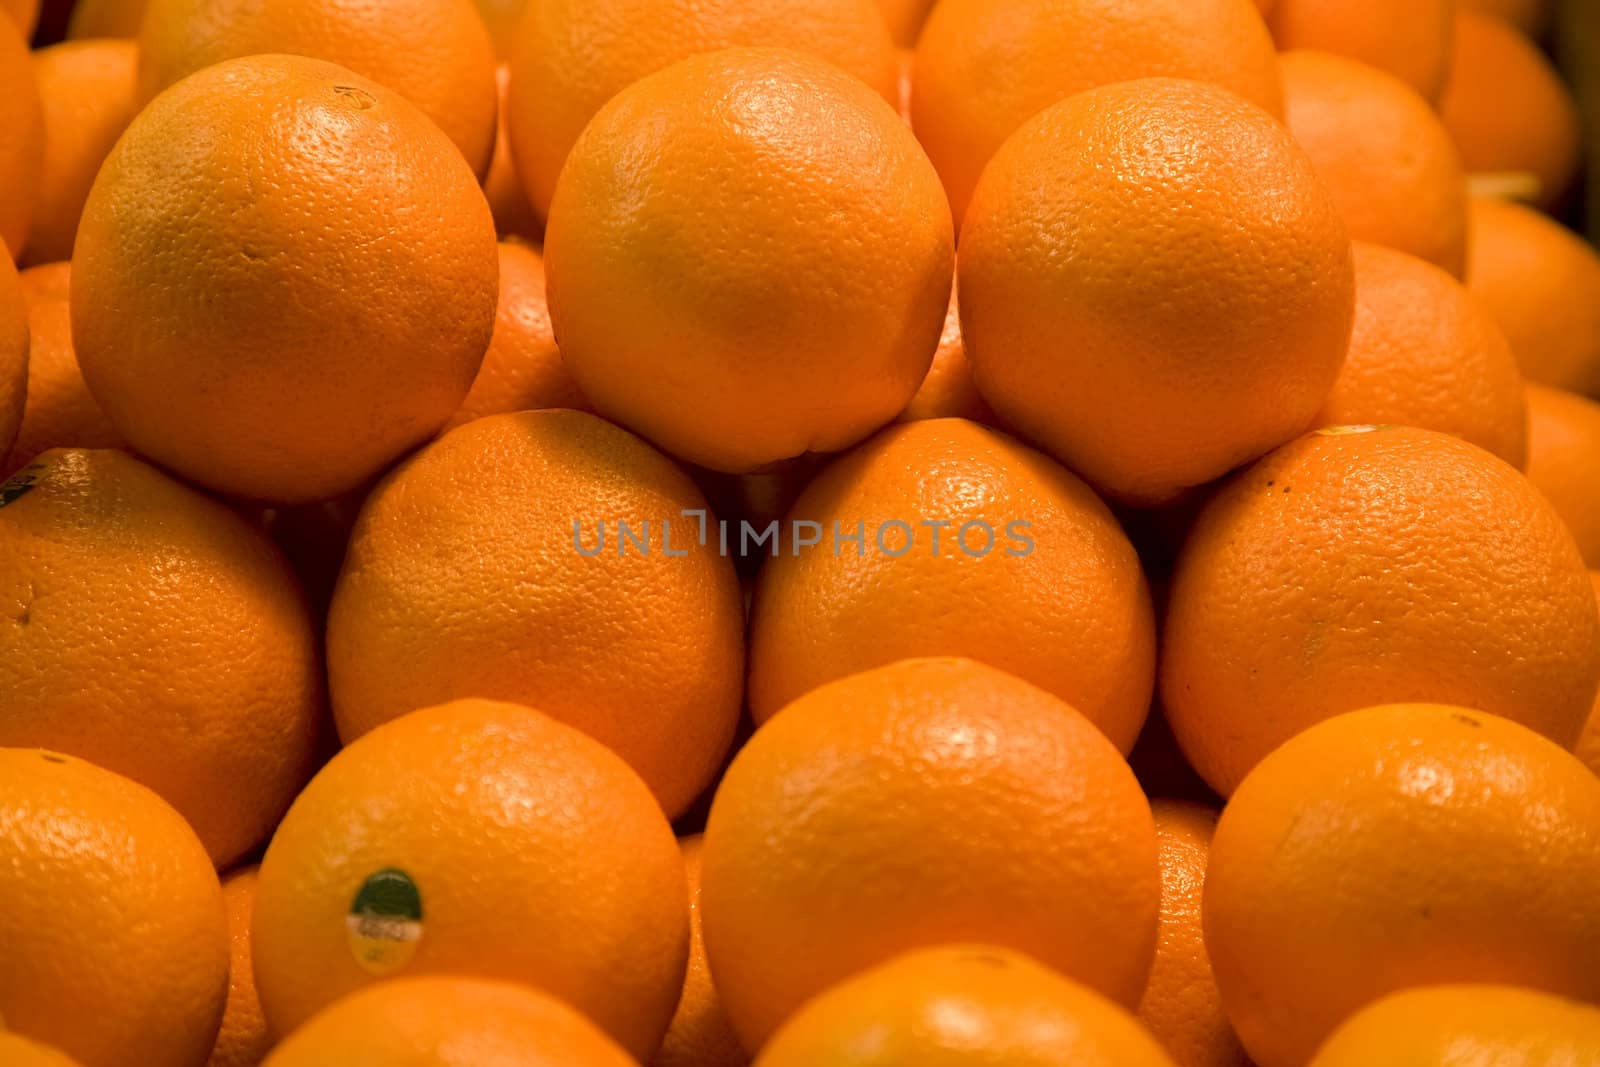 Pile of Bright Oranges Fruit

Trademark removed.

Resubmit--In response to comments from reviewer have further processed image to reduce noise, sharpen focus and adjust lighting.